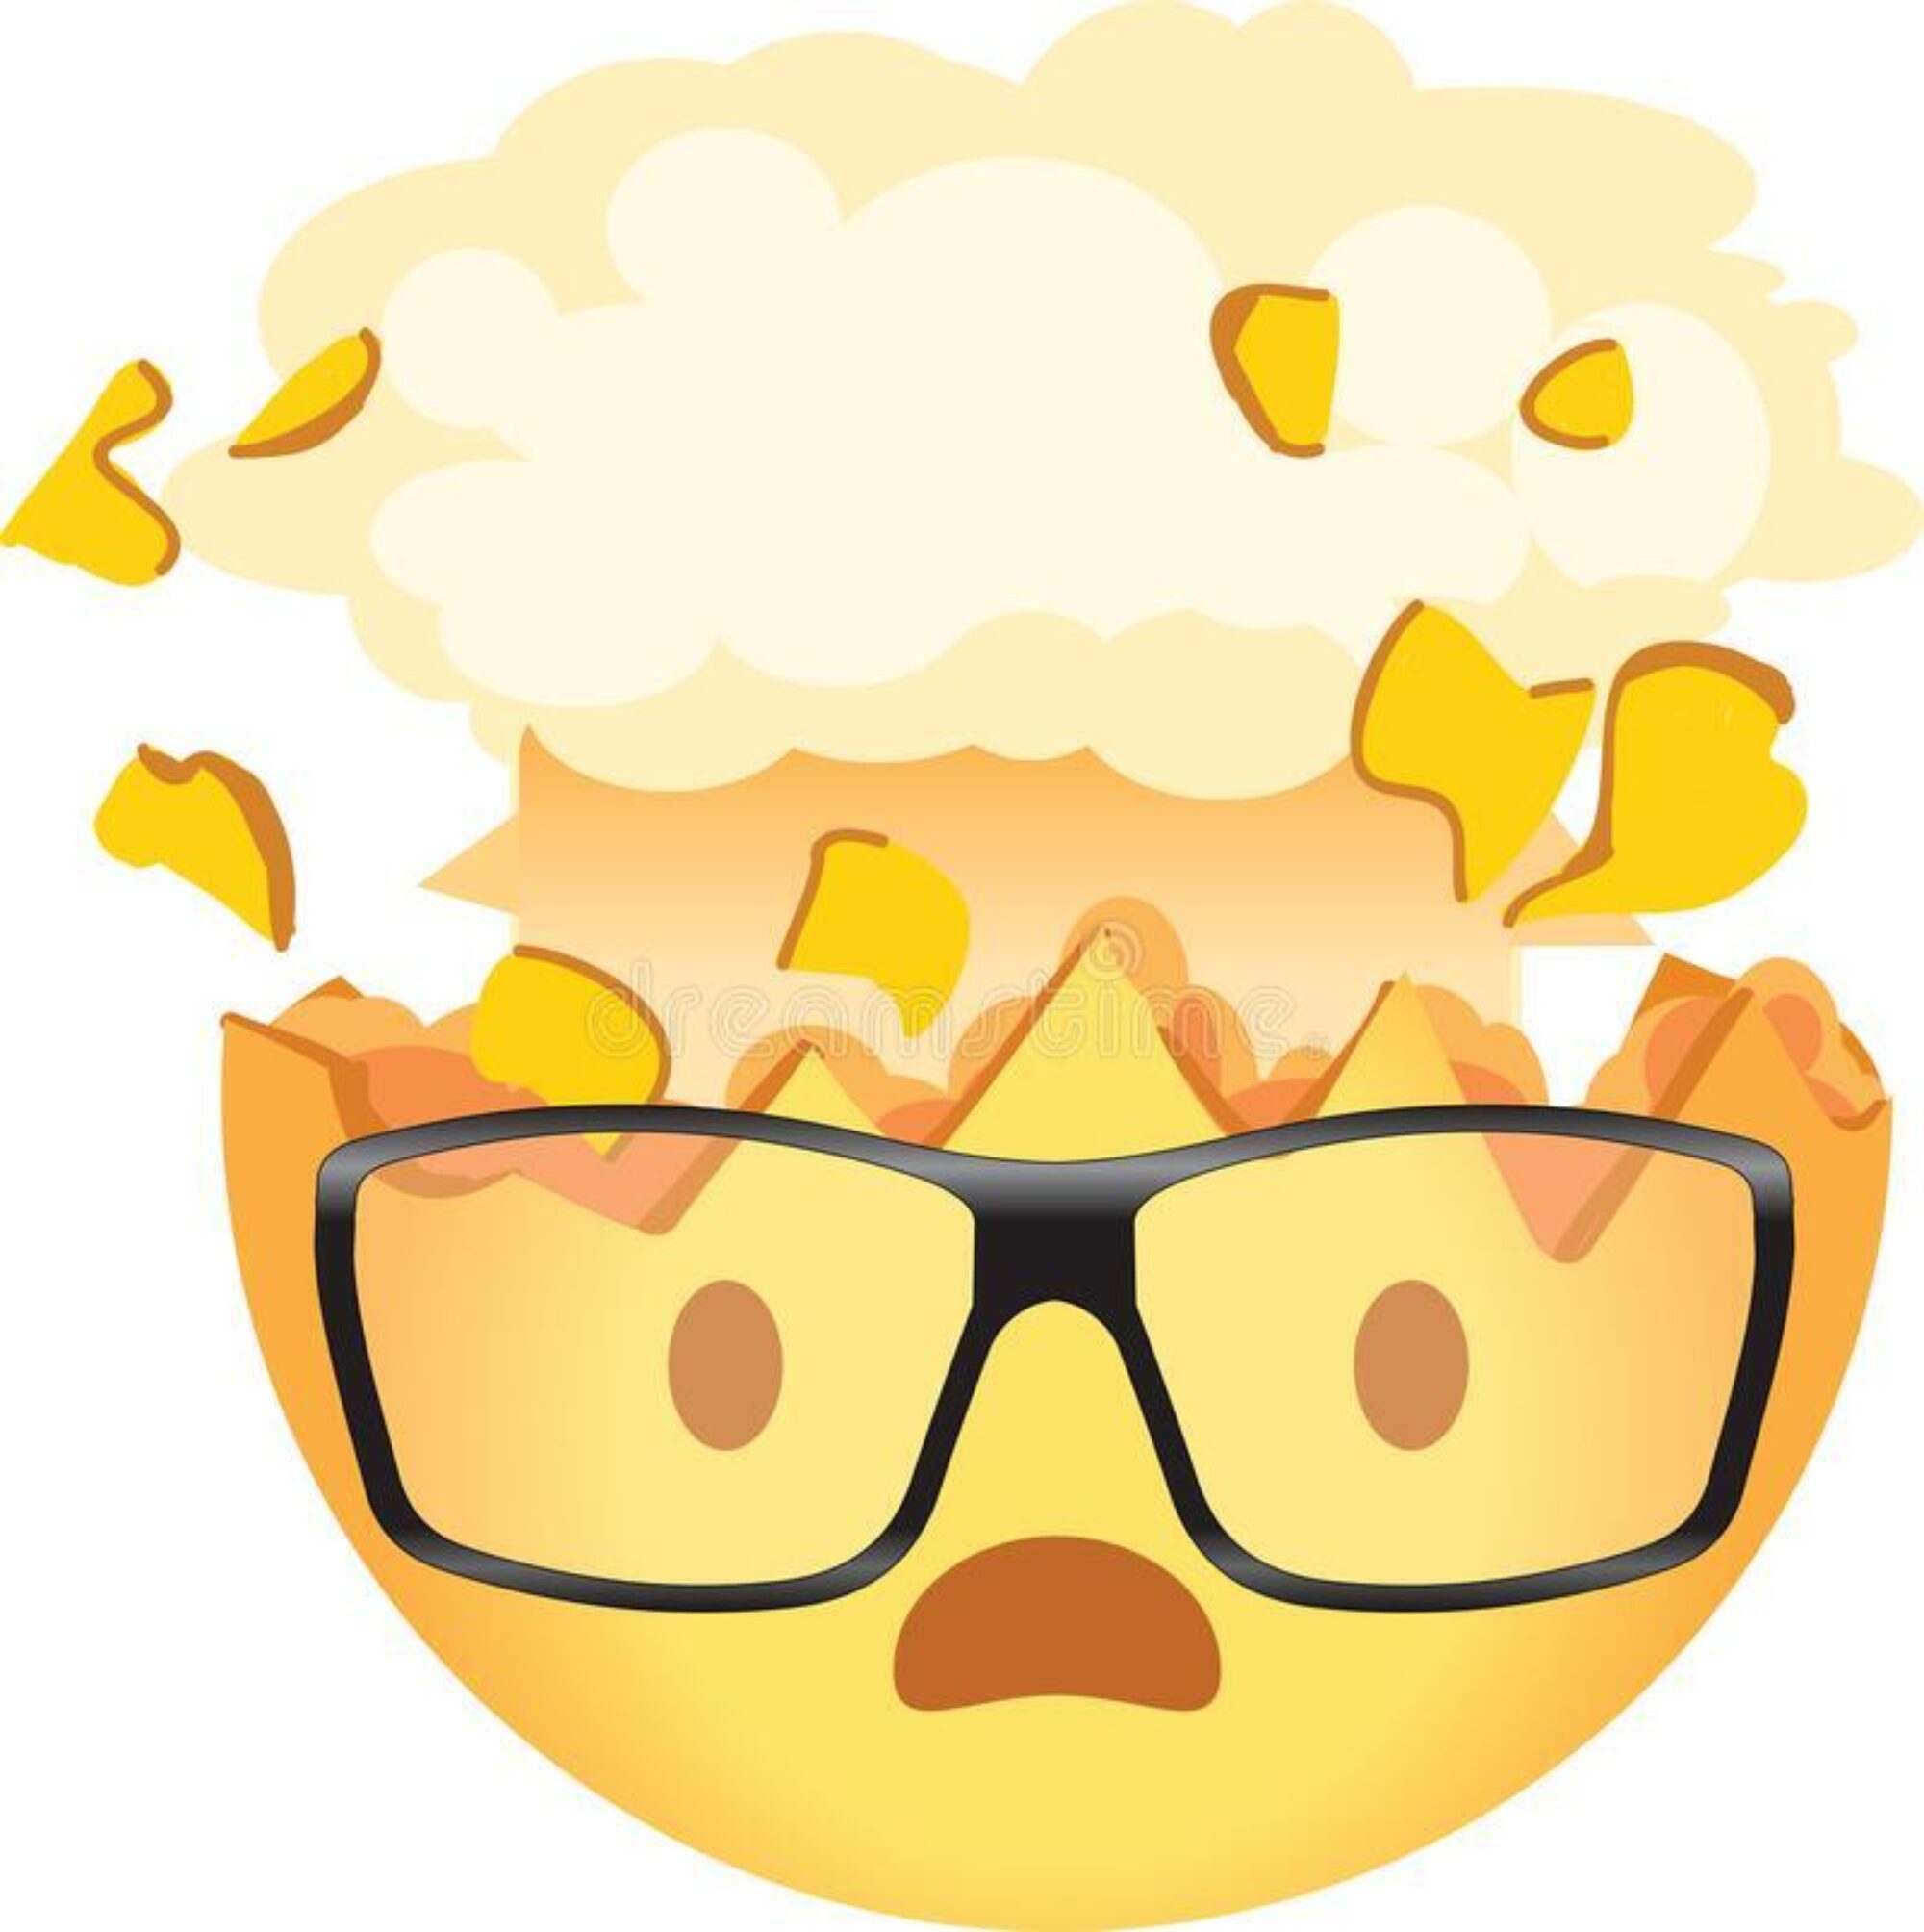 Shocked emoji wearing glasses exploding head nerd emoticon yellow face open mouth top its shape brain like 181735892